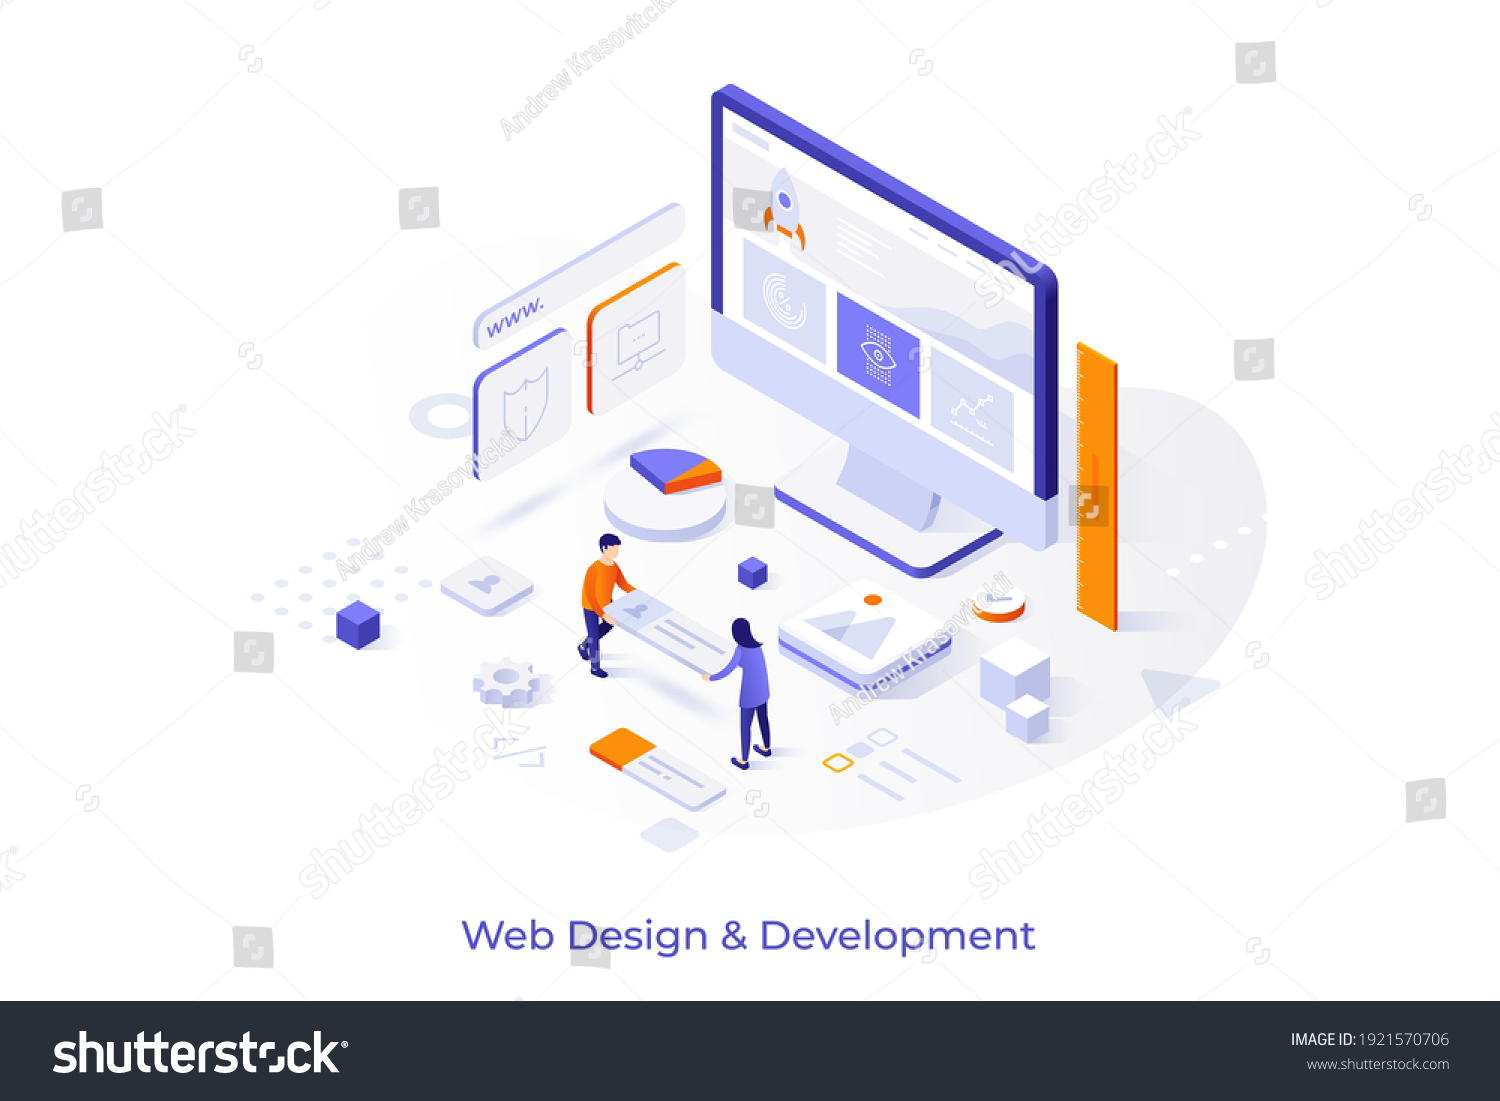 Conceptual template with computer and people building website interface. Scene for web design and development, site builder online tool or service. Modern isometric vector illustration for webpage. #1921570706